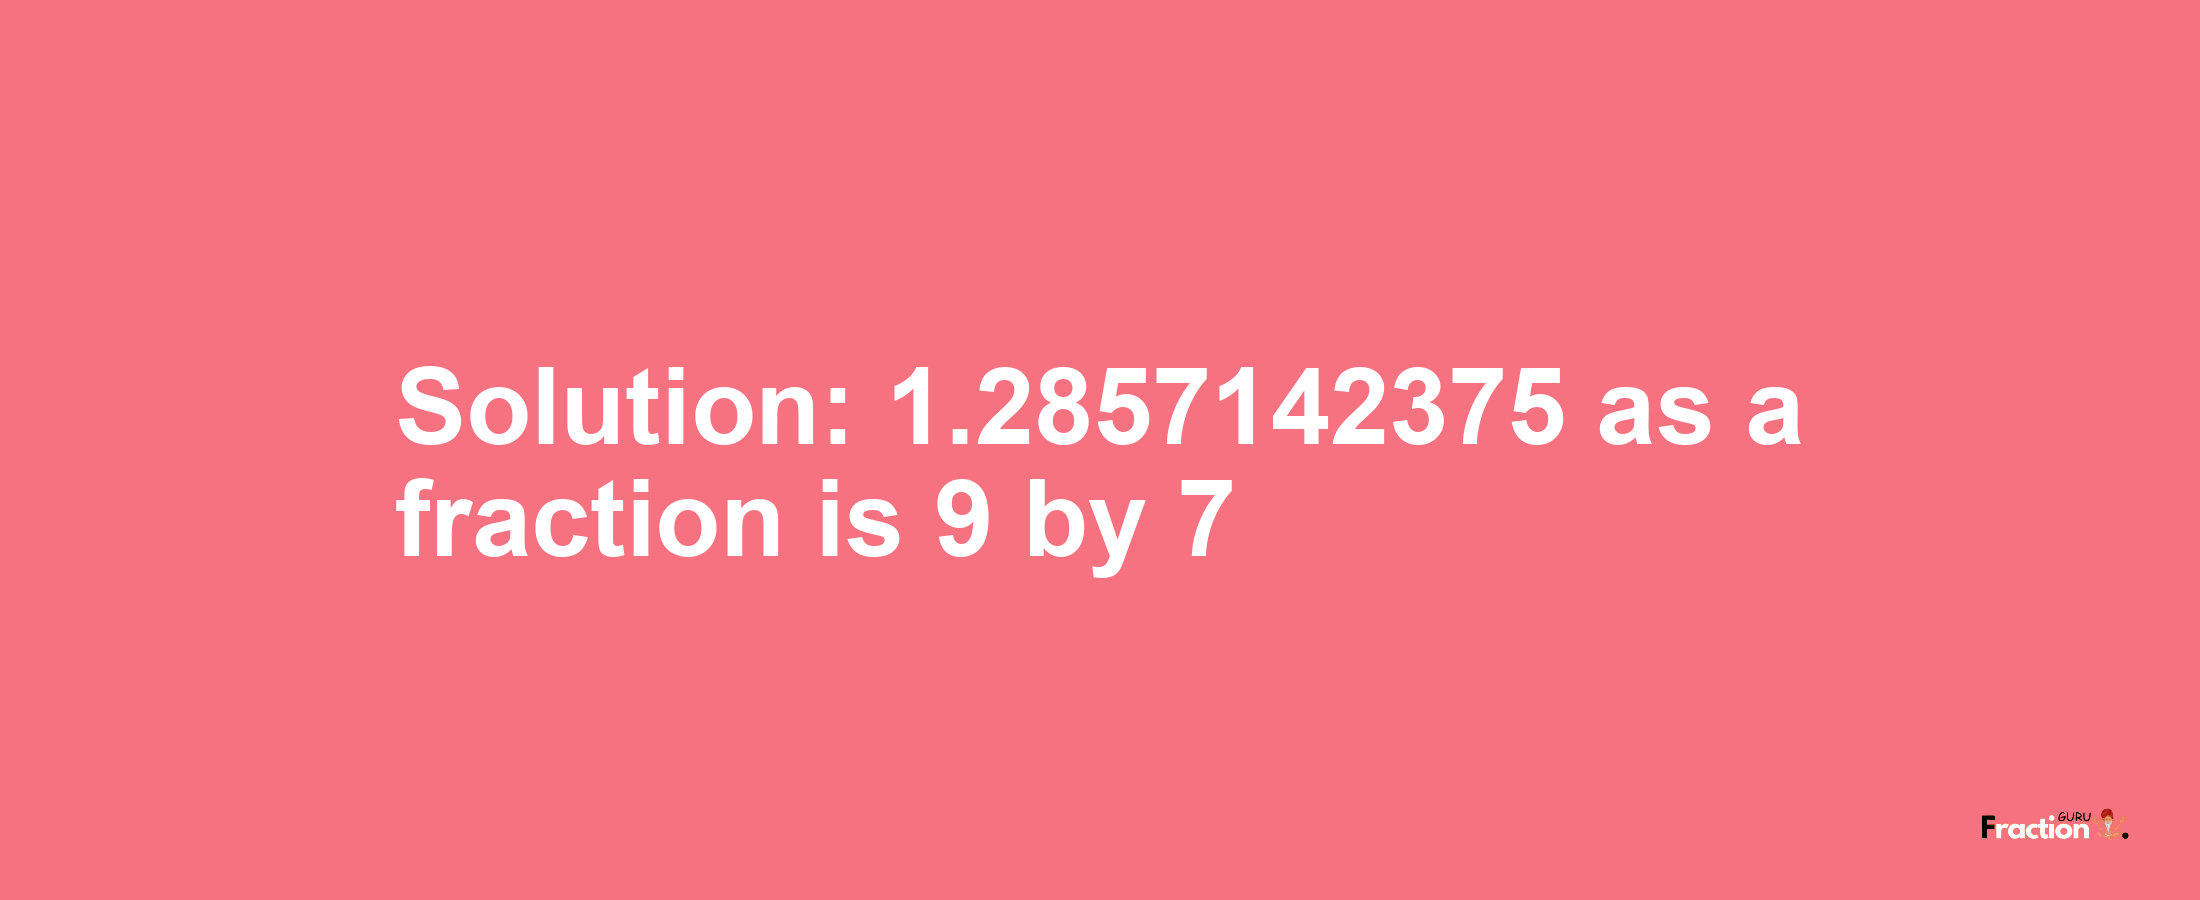 Solution:1.2857142375 as a fraction is 9/7